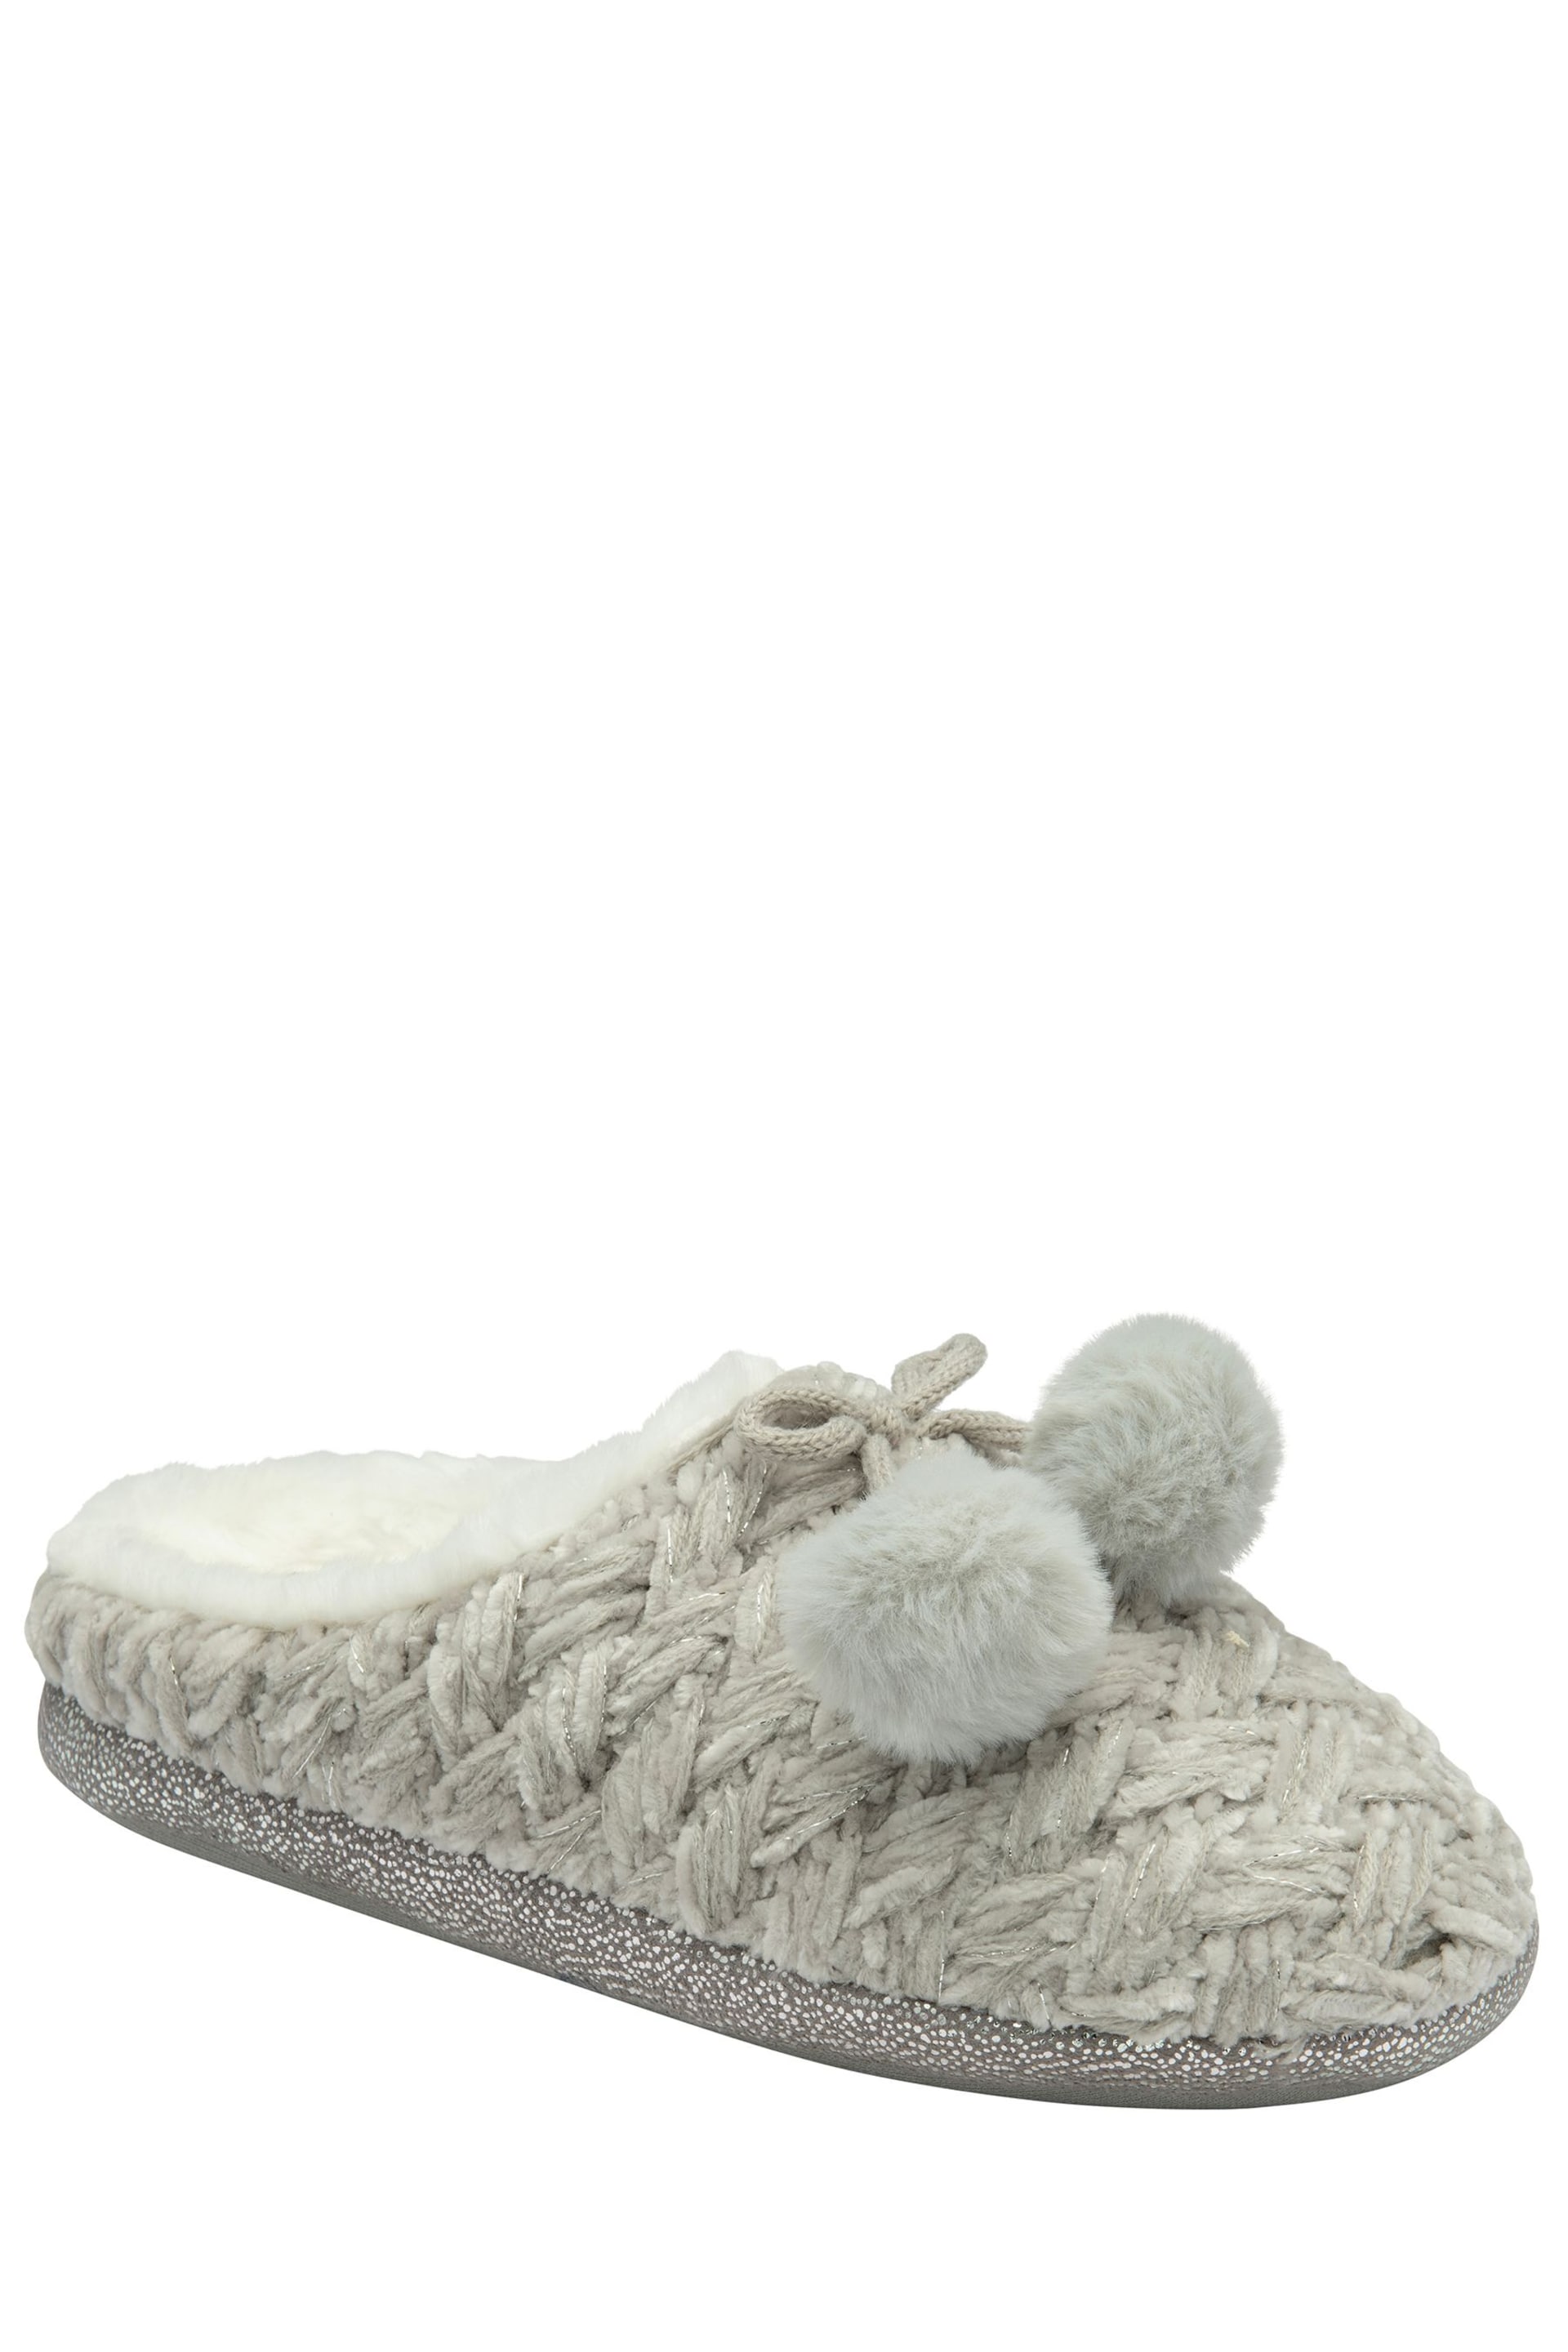 Dunlop Grey Ladies Knitted Closed Toe Mule Slippers - Image 1 of 4